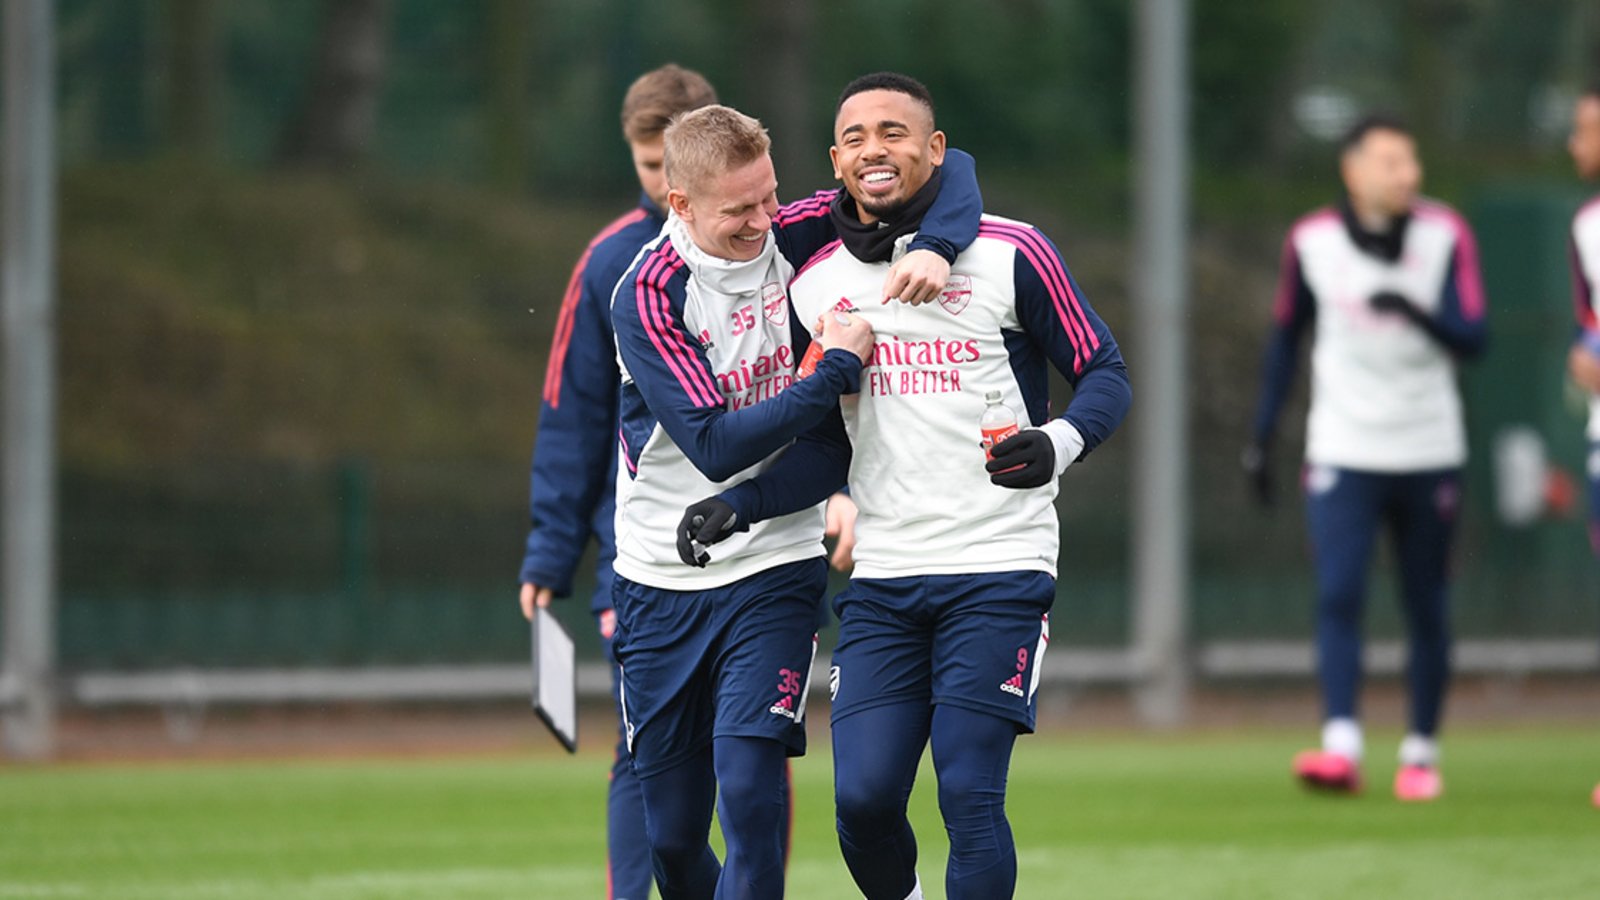 Gallery: Prepping for Palace